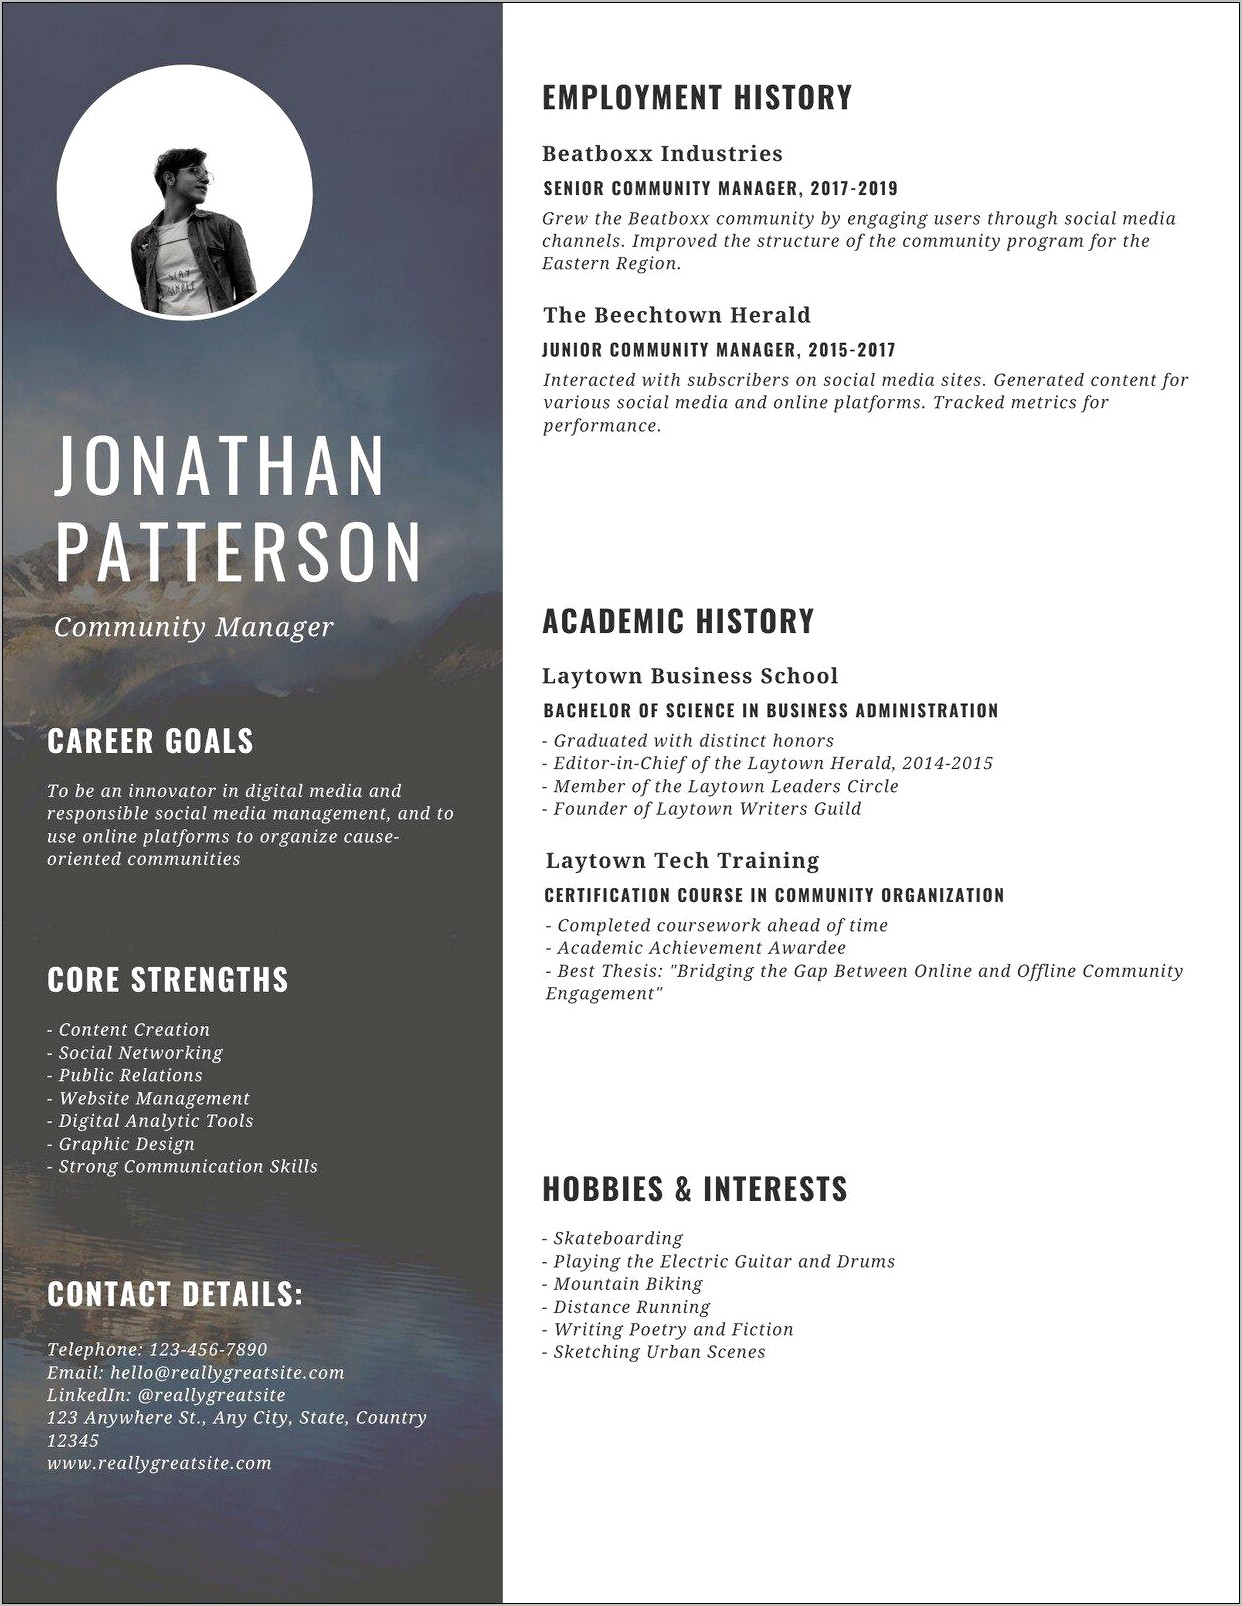 Graphic Design Project Manager Resume